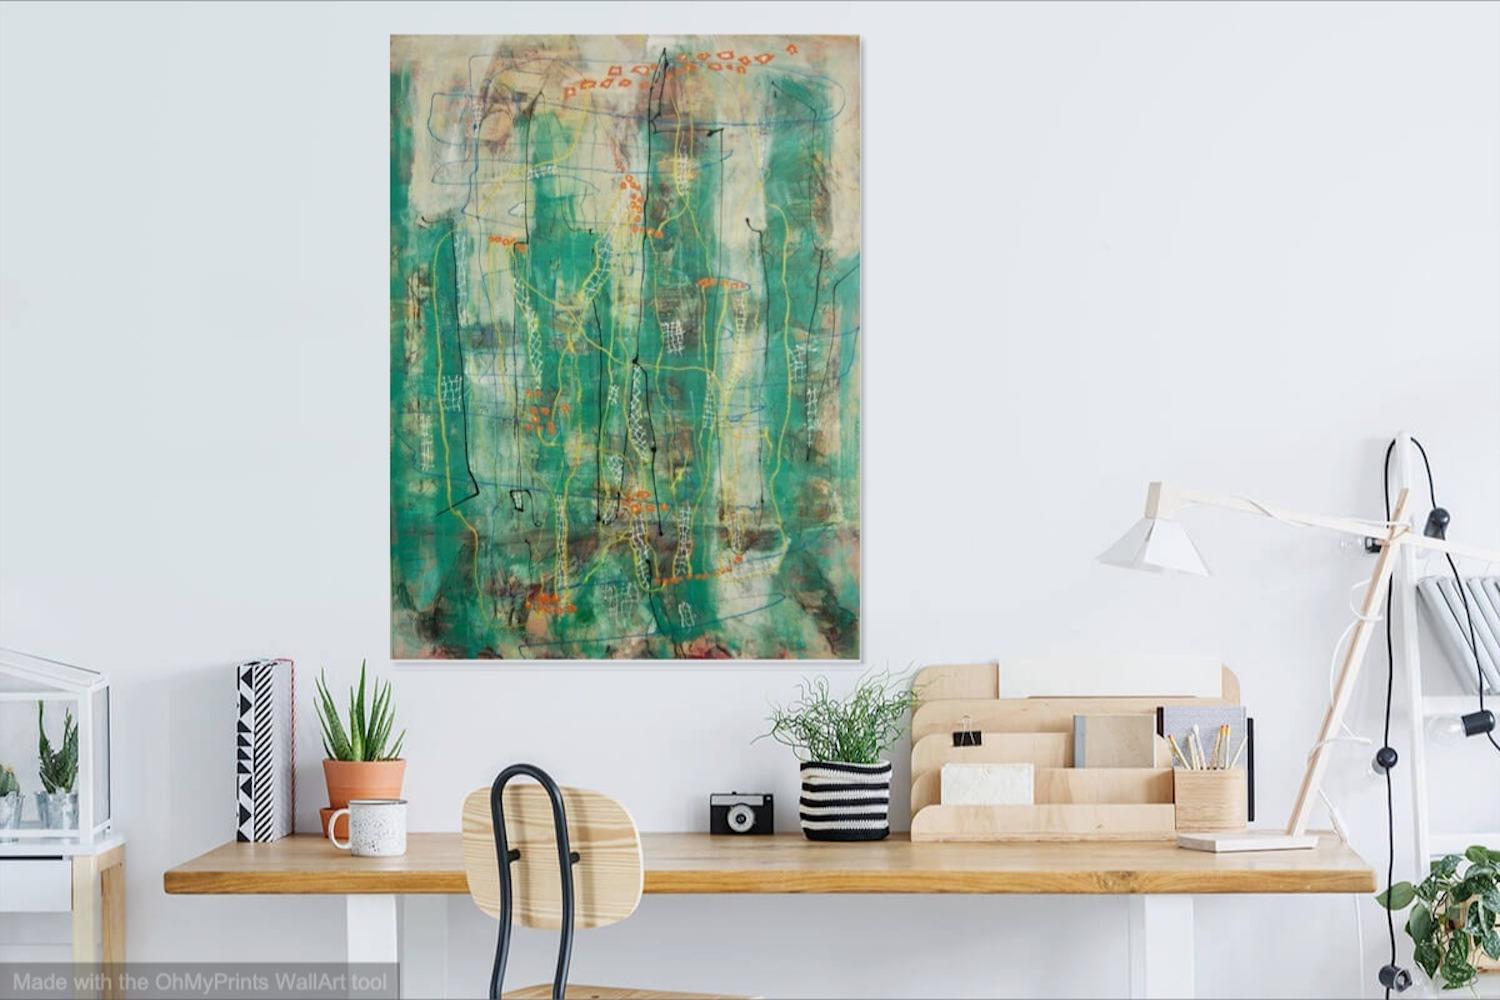 Whimsical Green Cityscape Painting - Abstract Buildings Artwork - Original Fine Art Mood - Modern Contemporary Home Office Decor - Urban Art